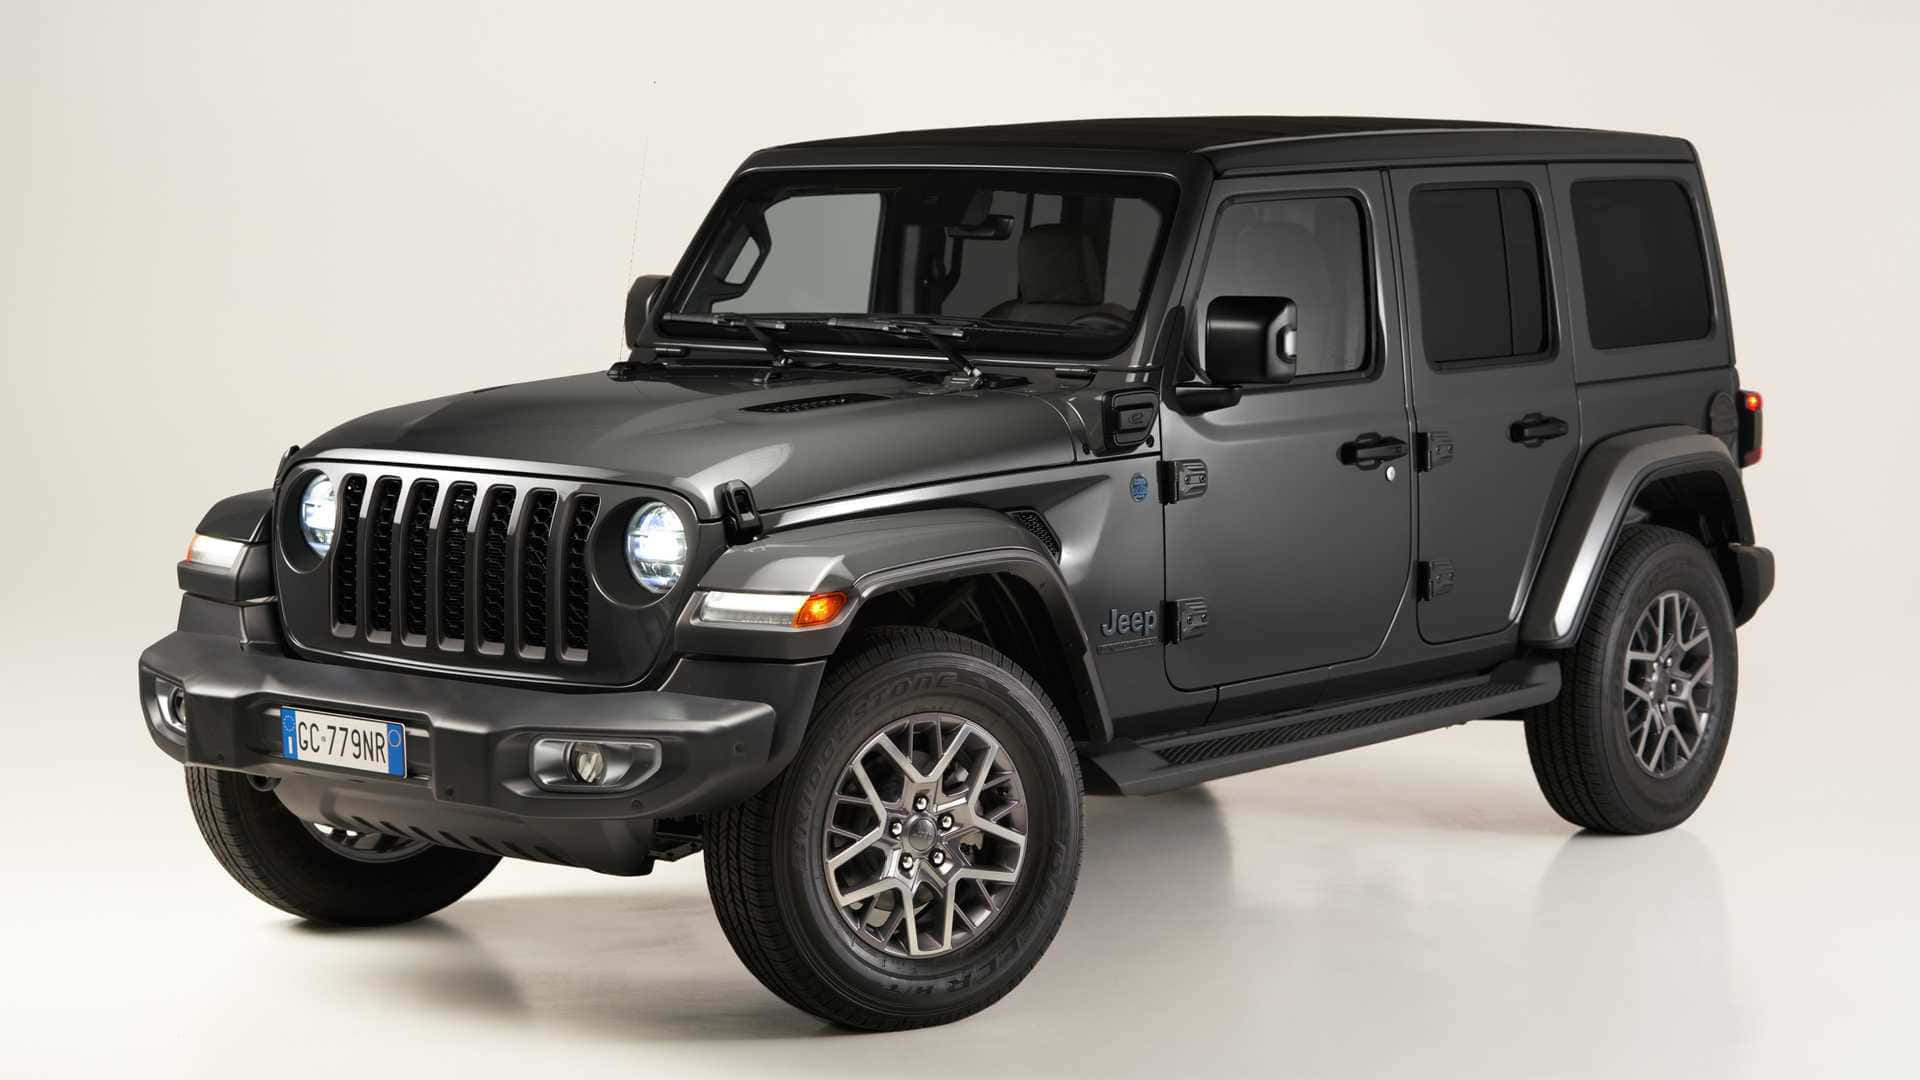 Conquer The Roadless With An Off-Road Jeep